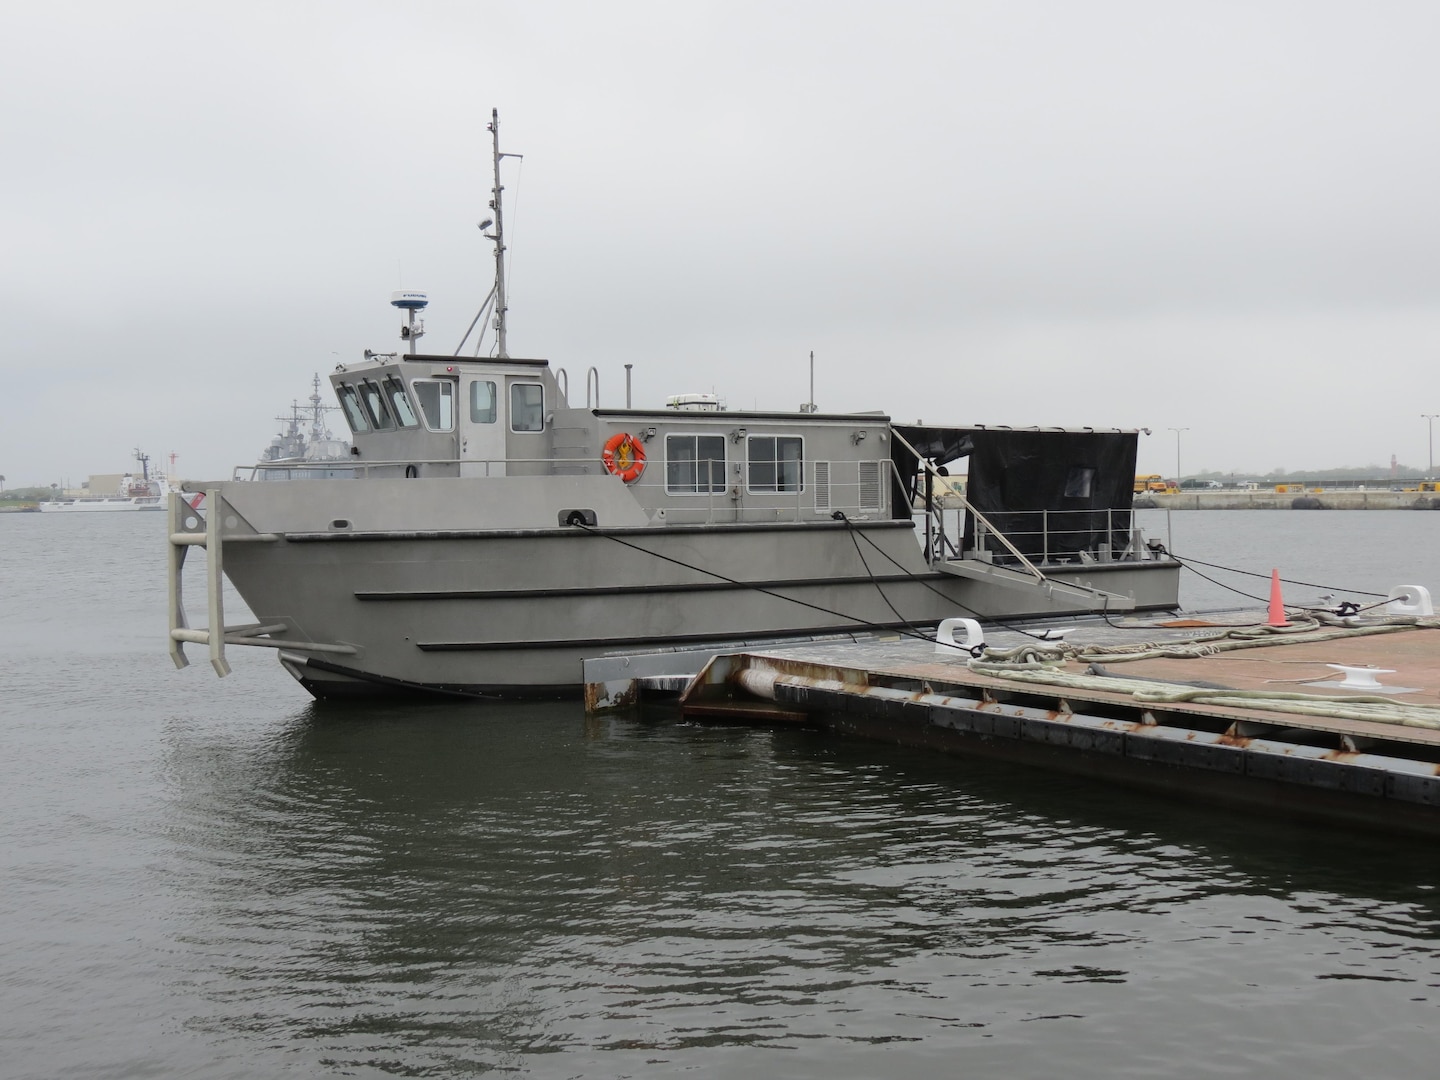 SERMC received a new Diver Support Boat that will enable its divers to conduct sustained waterborne repairs to ships in the Mayport basin.